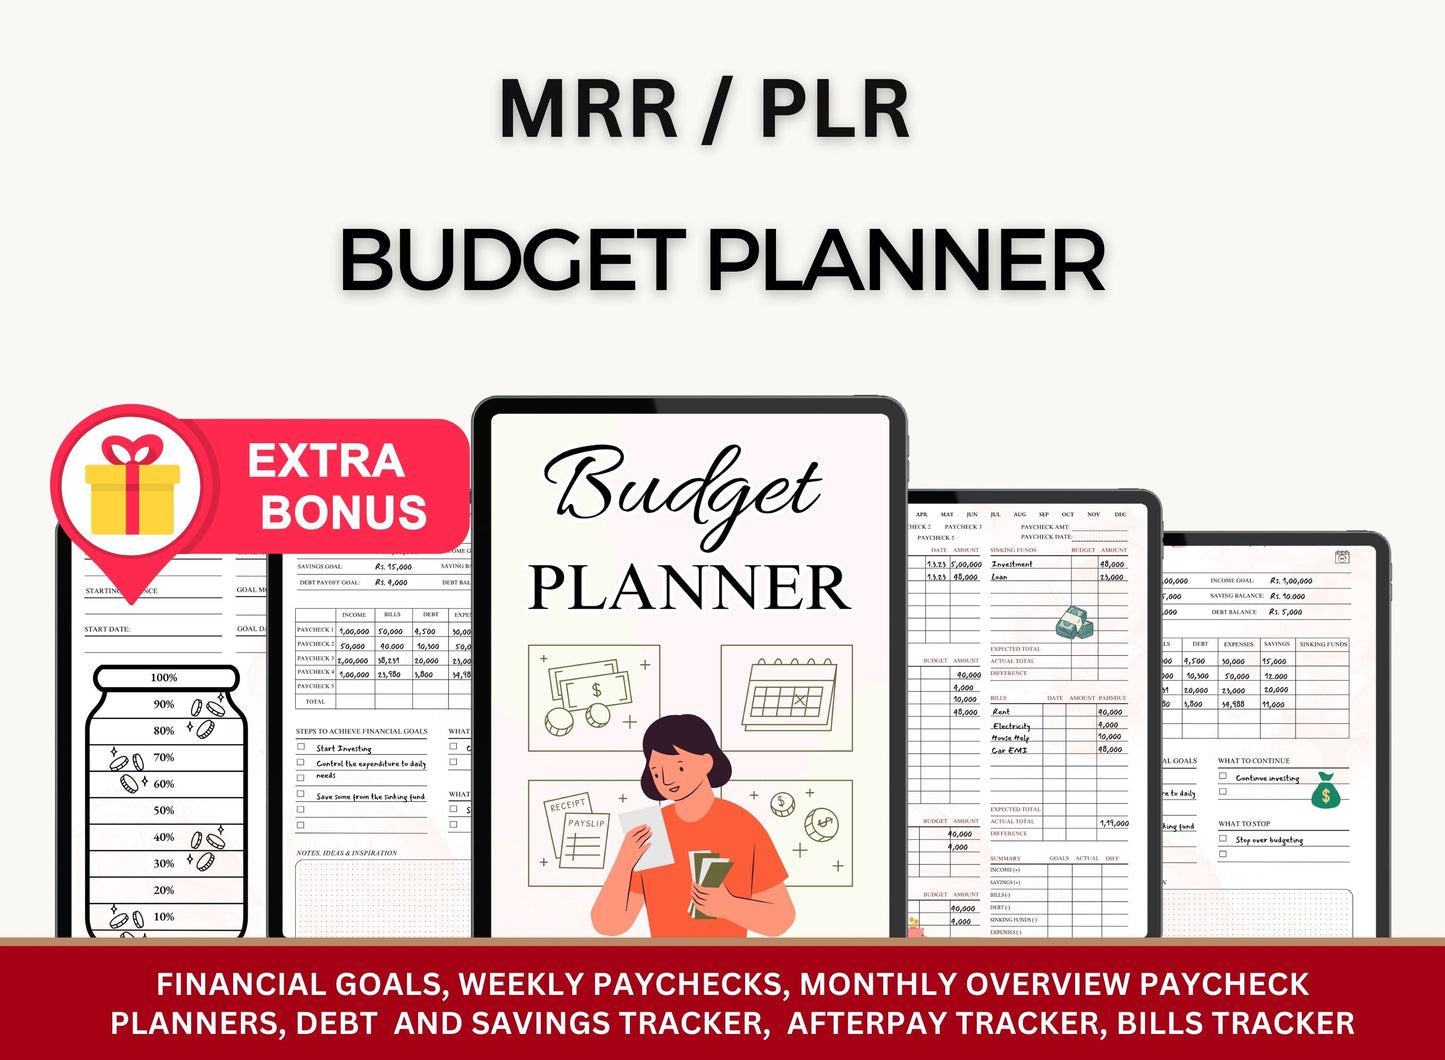 master resale rights, master resale, plr resell, plr resell rights, planner plr, plr planners